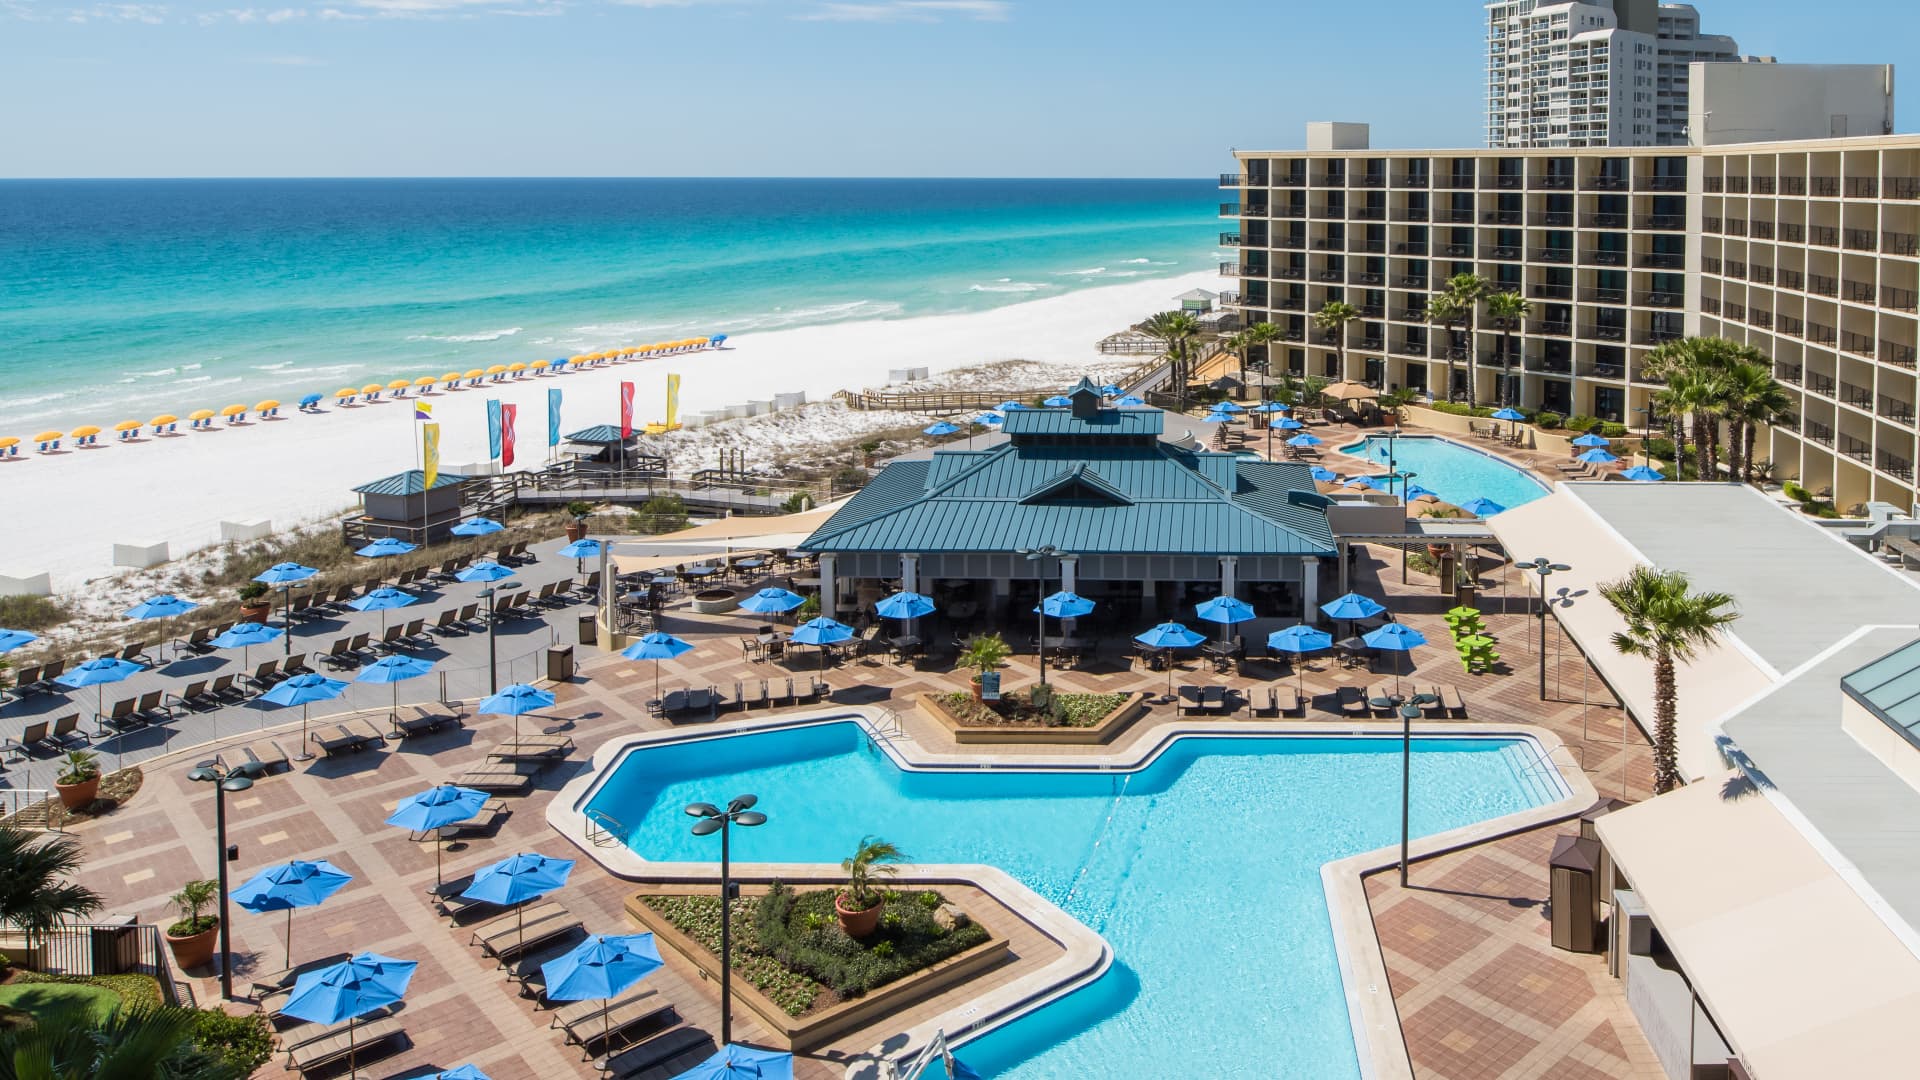 A month-long stay at Hilton Sandestin Beach Golf Resort & Spa, which starts at $90 a night, comes with breakfast, afternoon cocktails, beach rentals and laundry service.